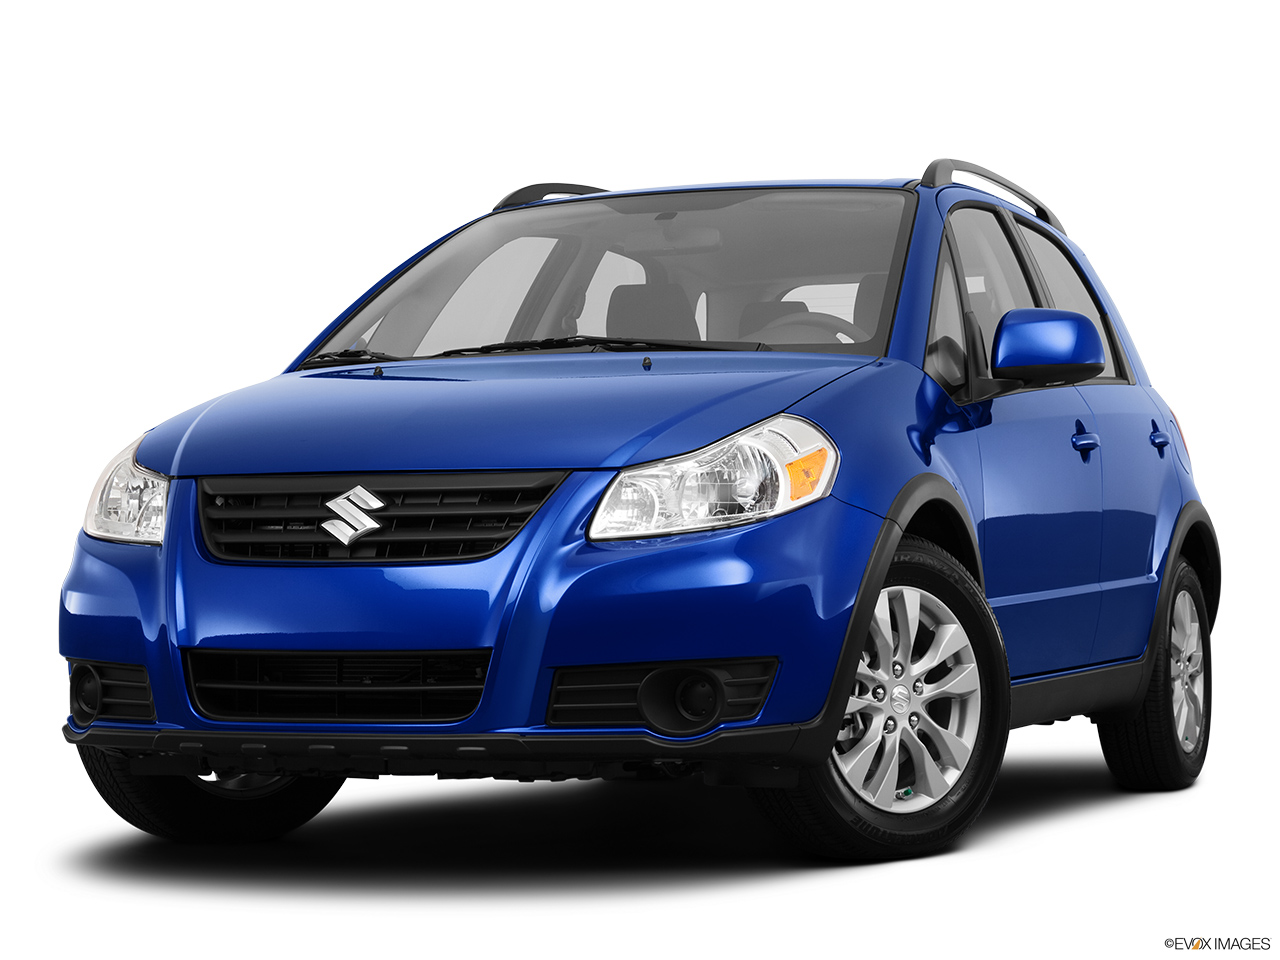 2013 Suzuki SX4 AWD Crossover Premium AT AWD Front angle view, low wide perspective. 